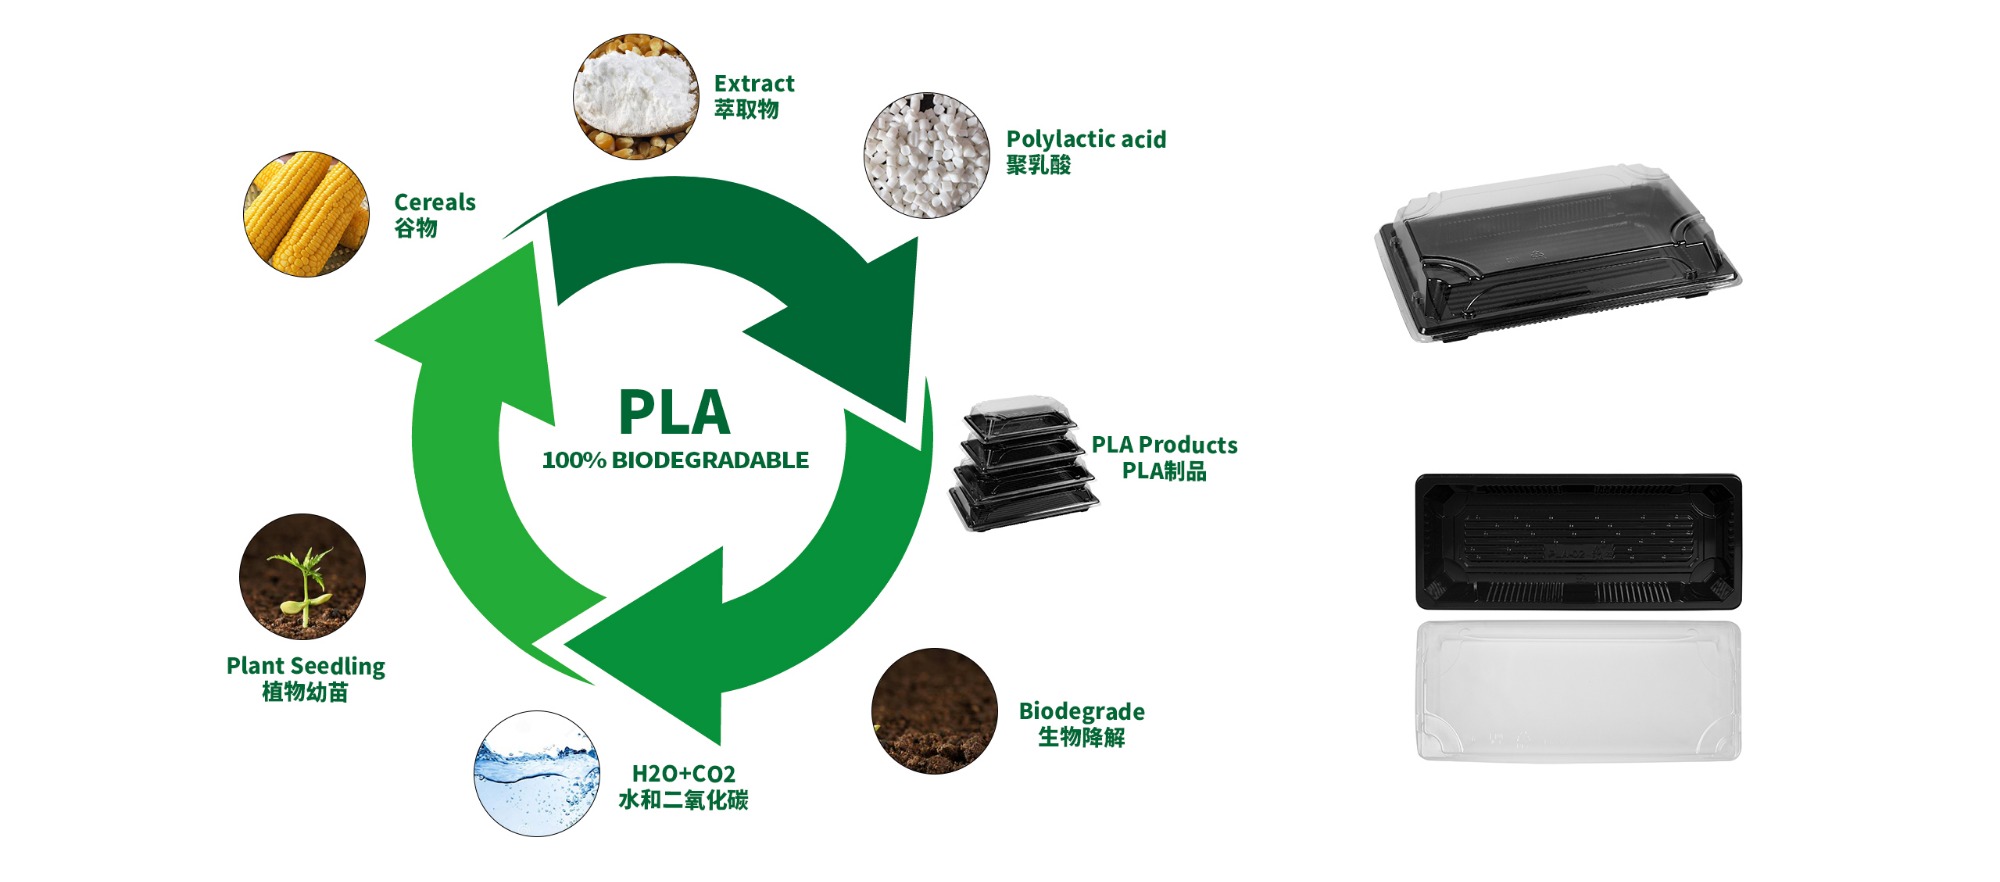 PLA is made of cornstarch extract, which can be decomposed and reused.